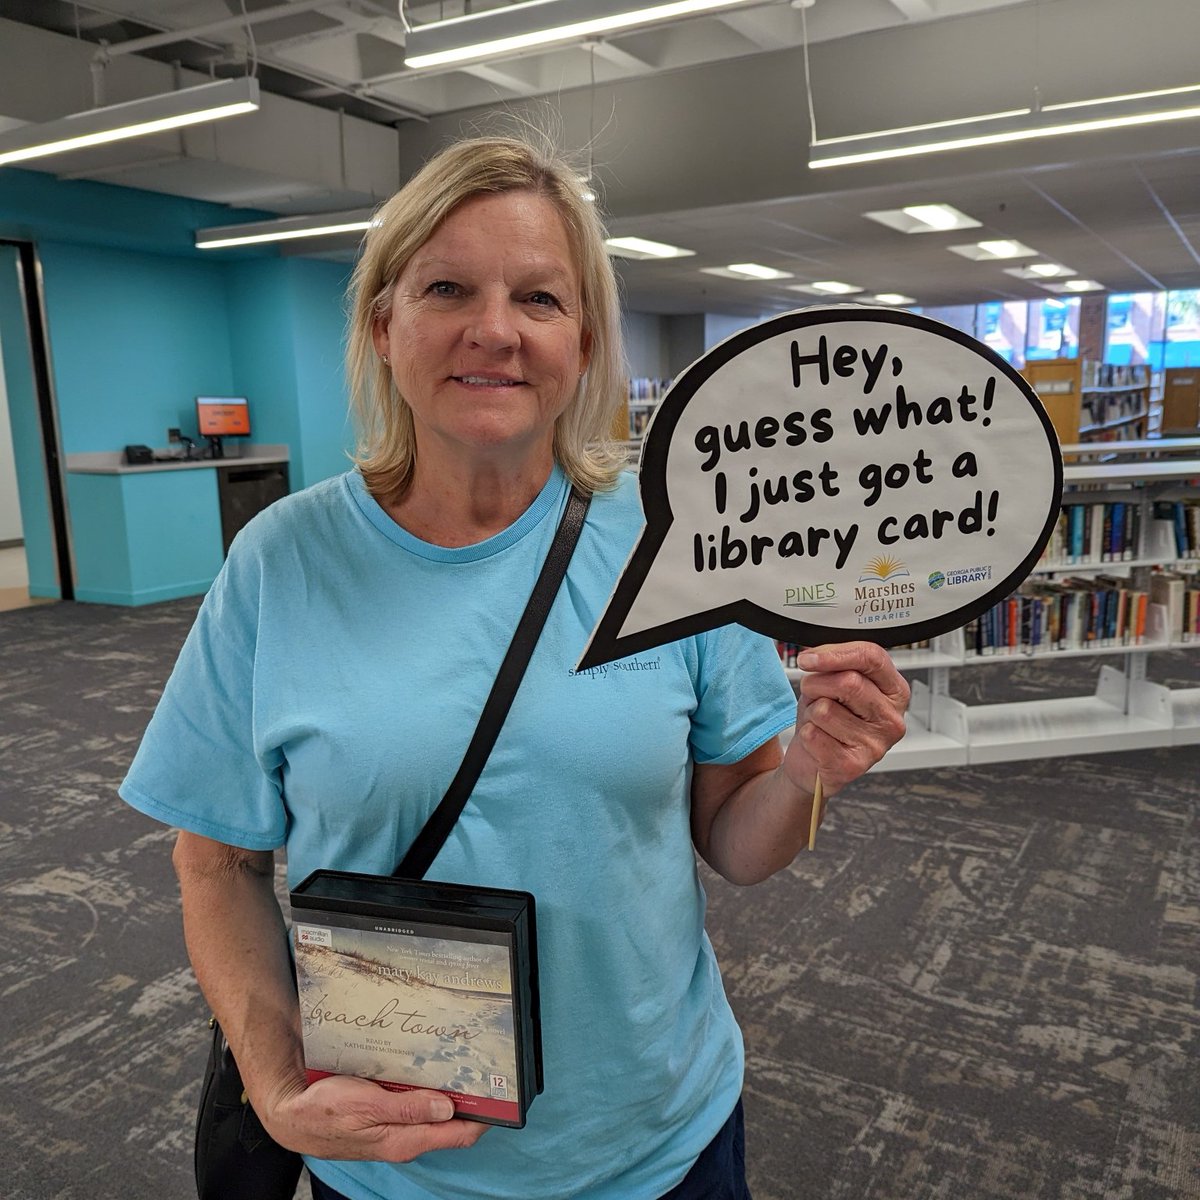 #ManyHappyReturns - Sign up for a PINES library card at the Brunswick or St. Simons Library this April and receive a library goodie bag celebrating our Library of the Year Award!  Visit moglibraries.org/library-cards/ to learn more. #GeorgiaLibraries #LibraryCards #NoFoolin